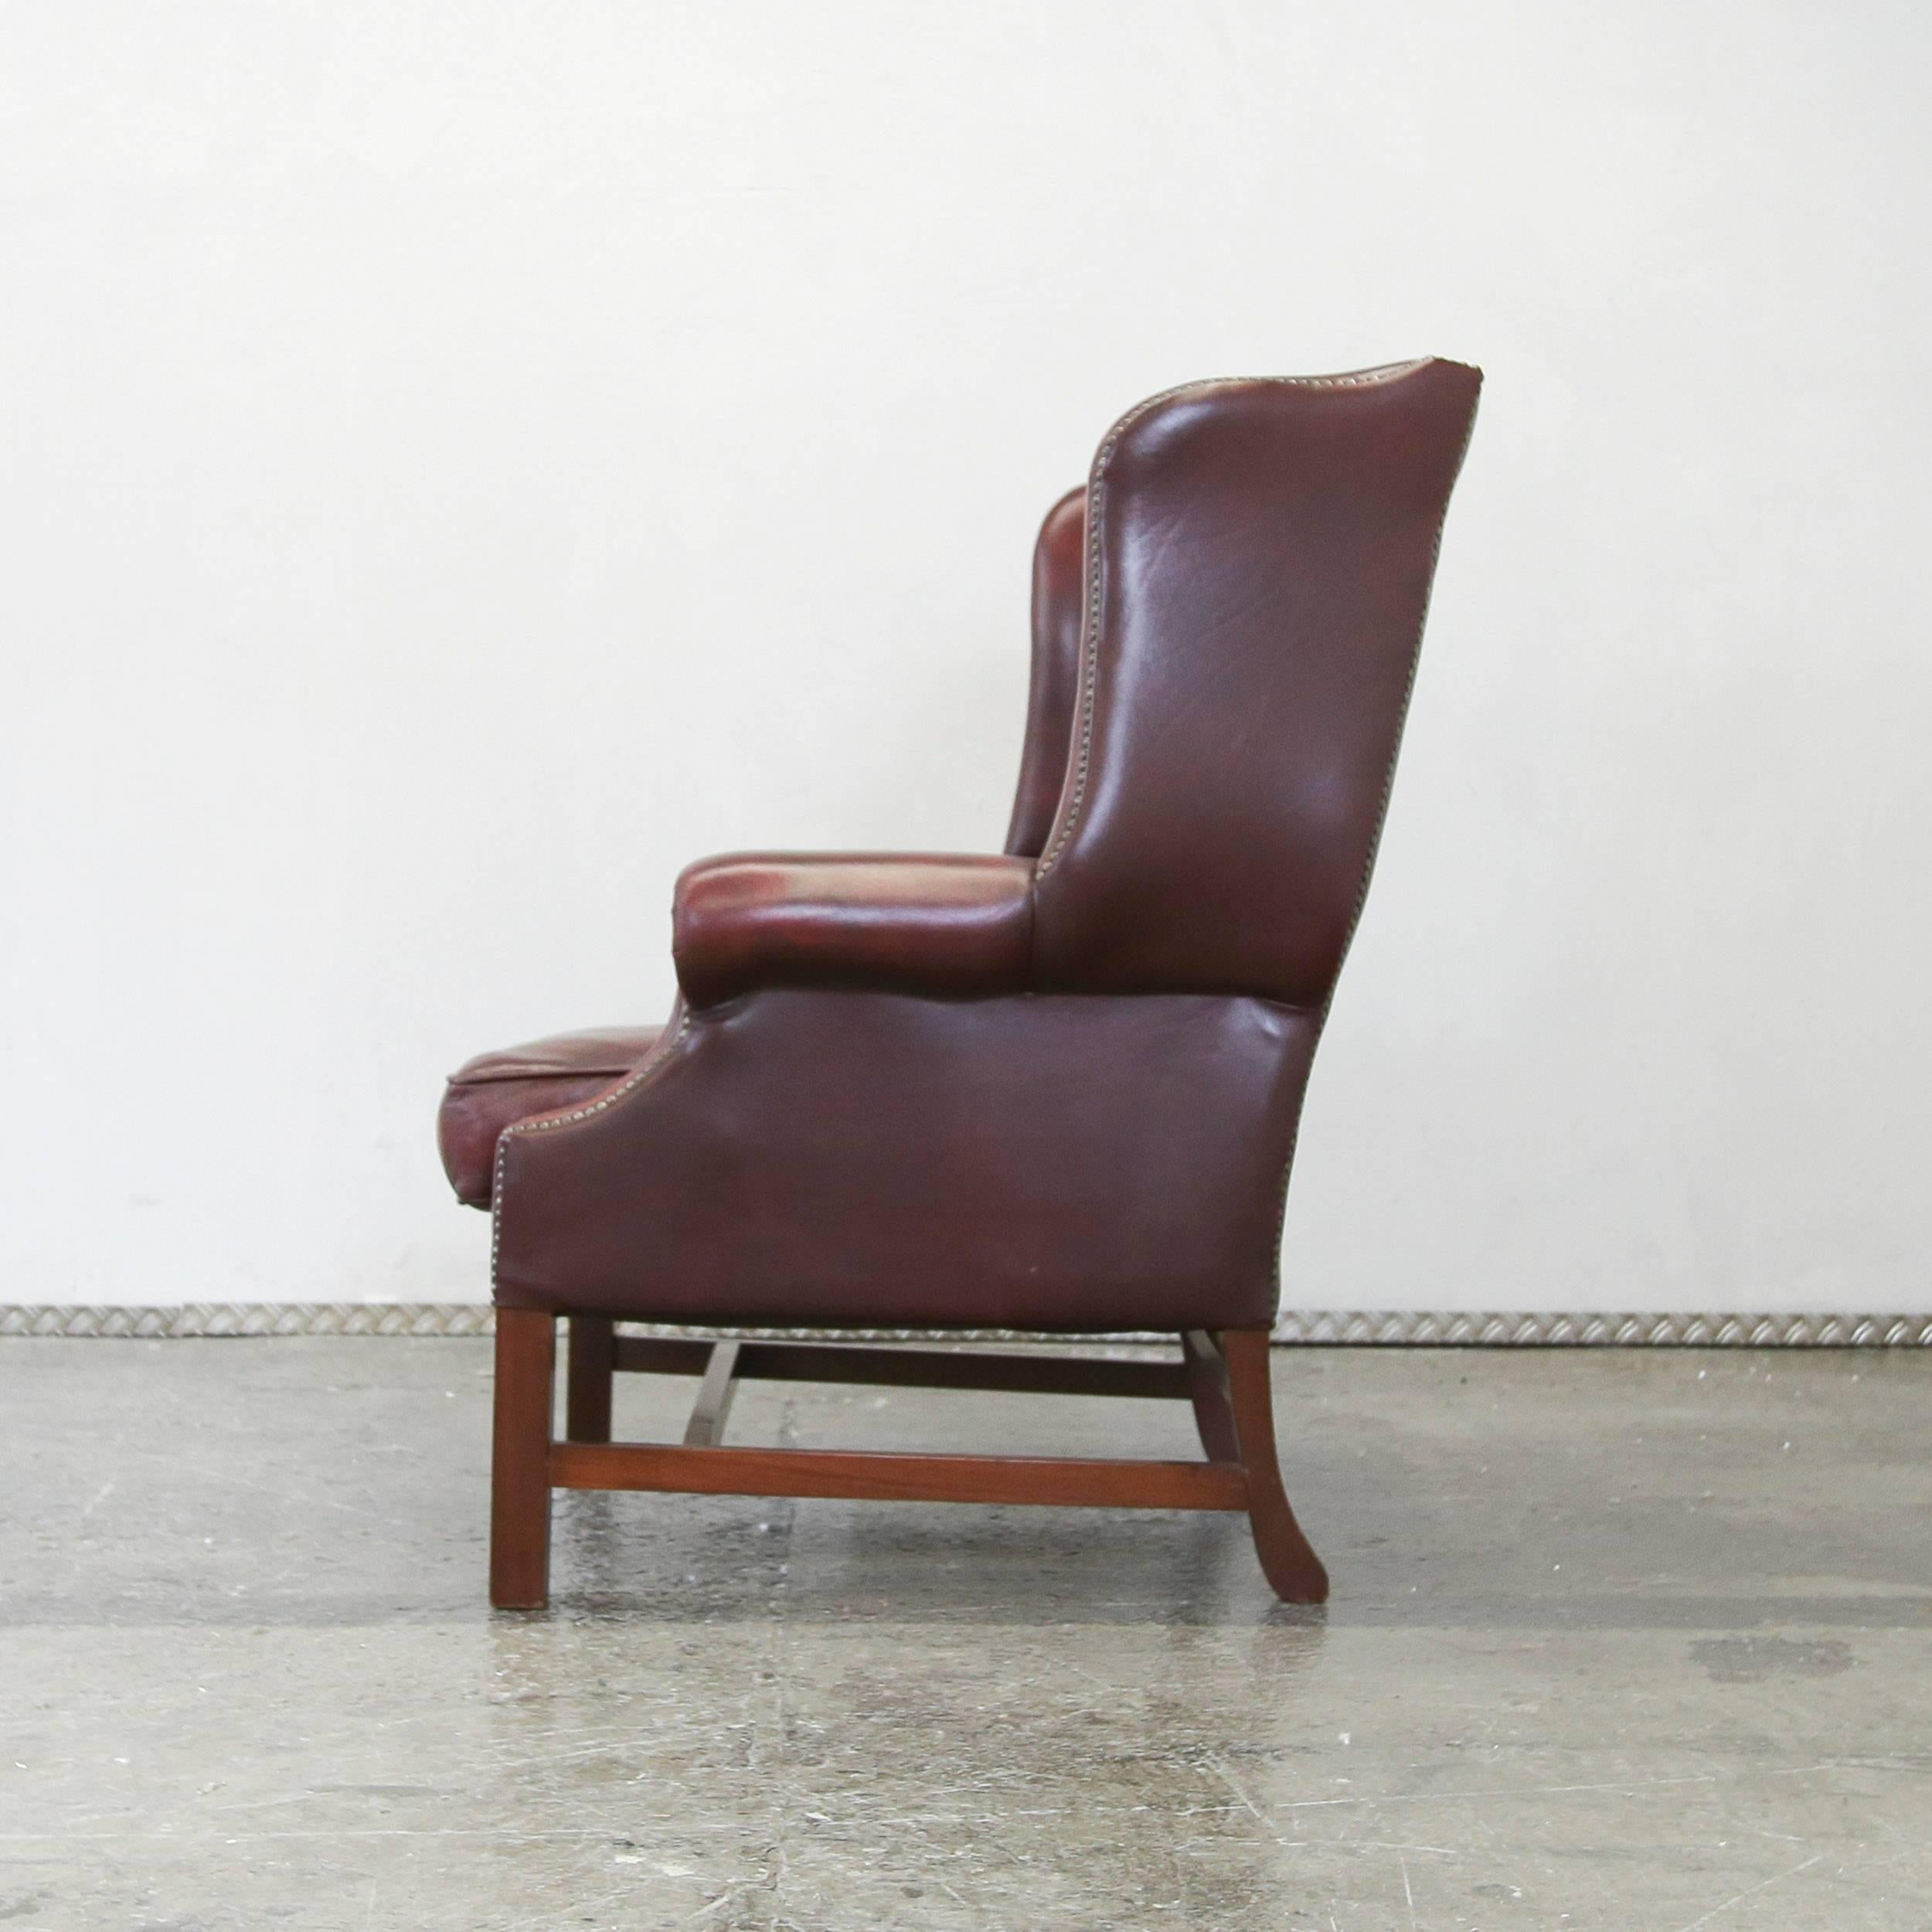 Chesterfield Wingchair Oxblood Red Armchair One Seat Vintage Retro 1